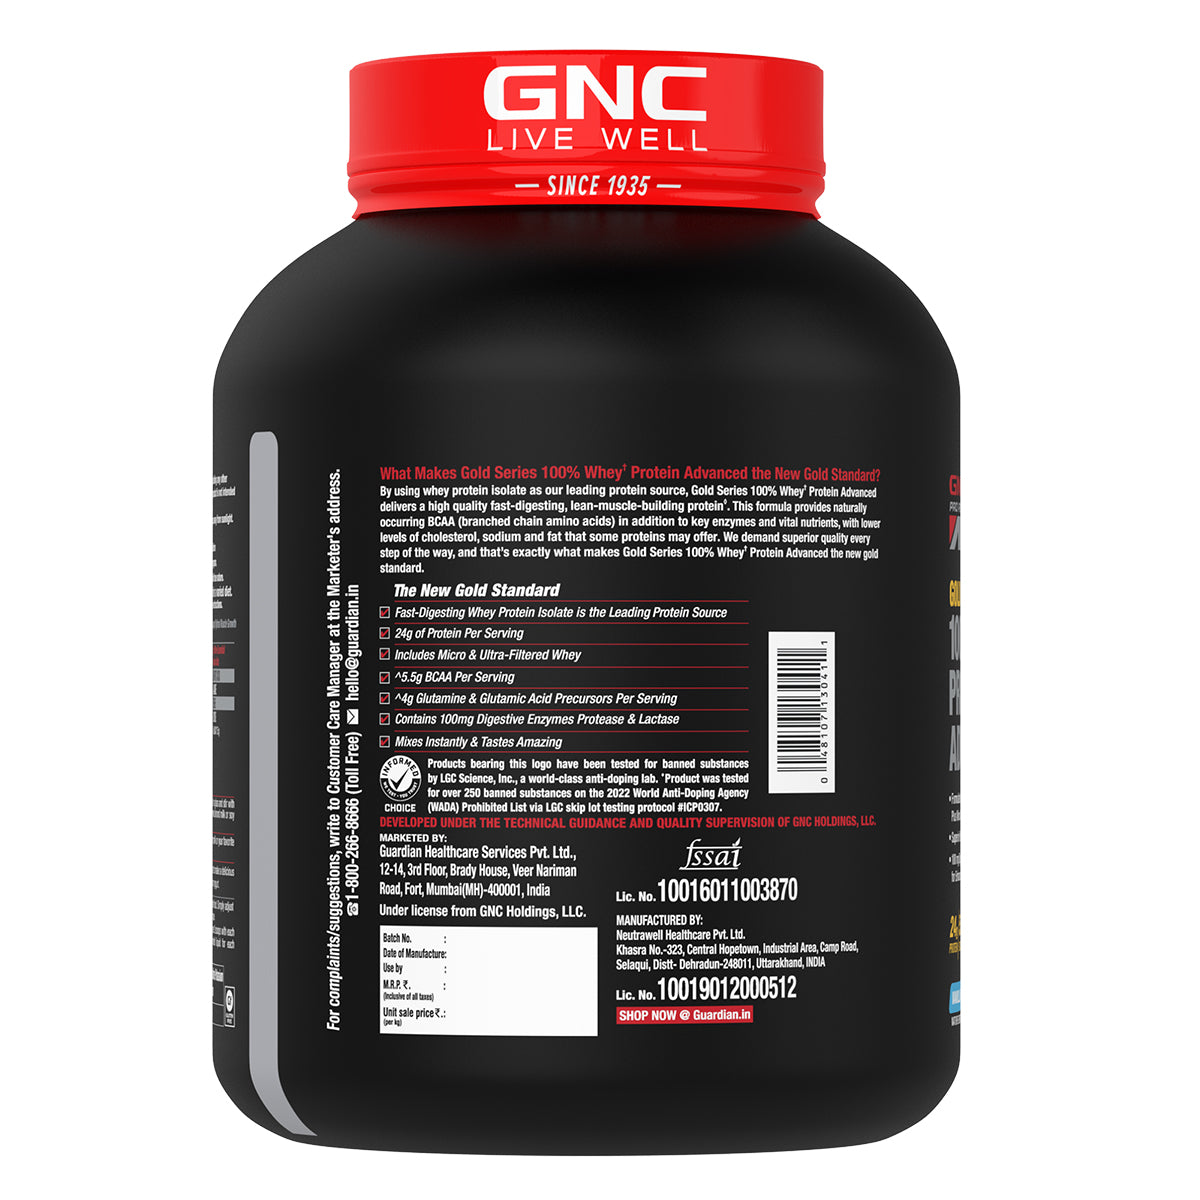 GNC AMP Gold Series 100% Whey Protein Advanced - Boosts Muscle Gains, Recovery & Workout Performance | Informed Choice Certified